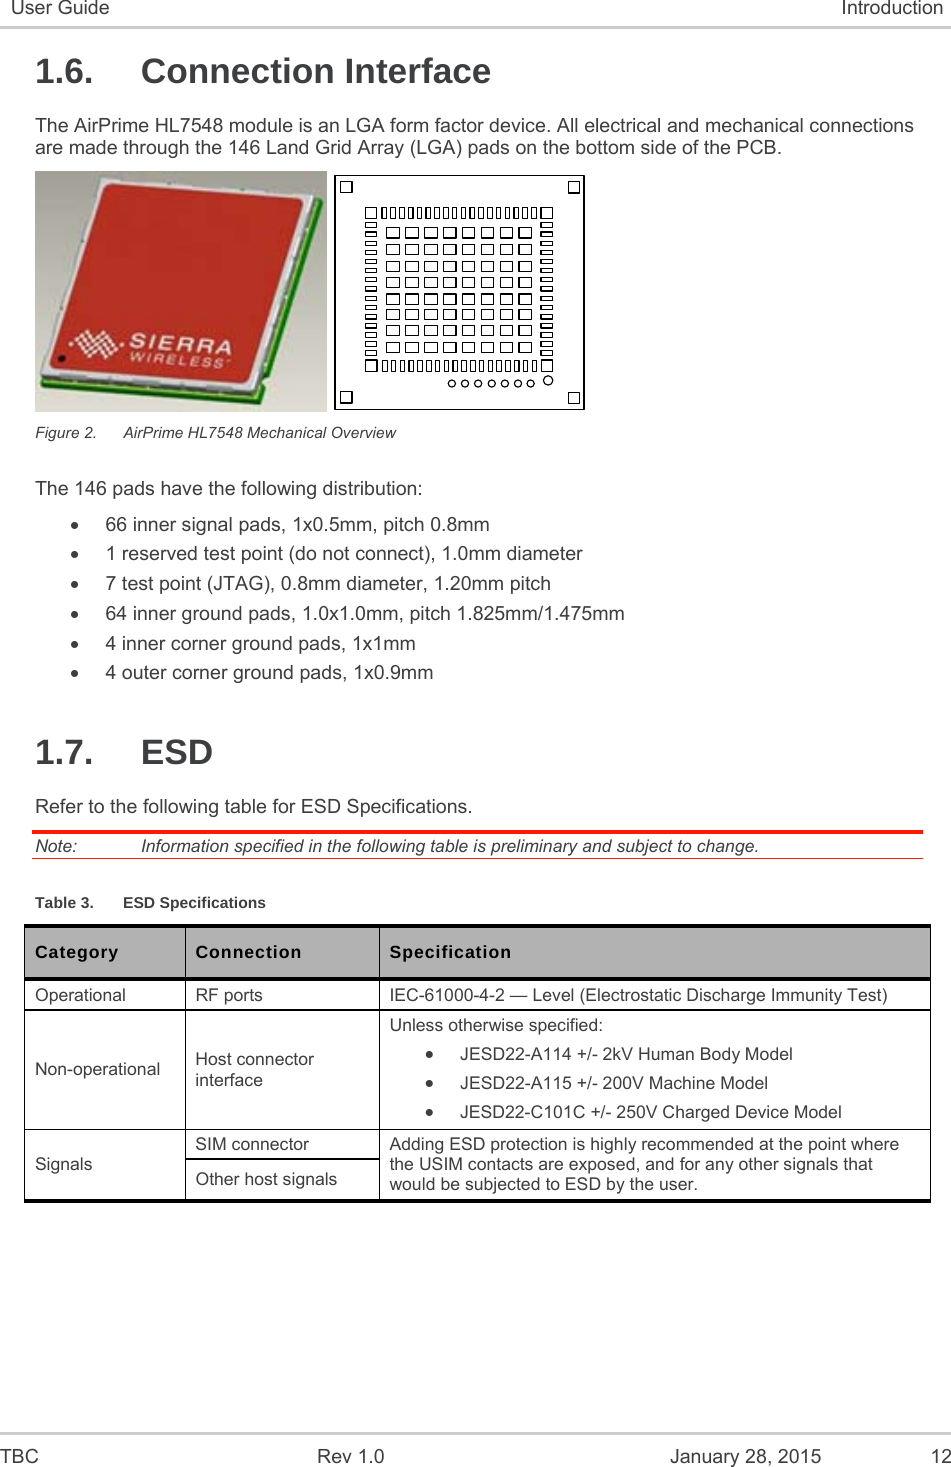  TBC  Rev 1.0  January 28, 2015  12 User Guide  Introduction 1.6. Connection Interface The AirPrime HL7548 module is an LGA form factor device. All electrical and mechanical connections are made through the 146 Land Grid Array (LGA) pads on the bottom side of the PCB.   Figure 2.  AirPrime HL7548 Mechanical Overview The 146 pads have the following distribution:   66 inner signal pads, 1x0.5mm, pitch 0.8mm   1 reserved test point (do not connect), 1.0mm diameter   7 test point (JTAG), 0.8mm diameter, 1.20mm pitch   64 inner ground pads, 1.0x1.0mm, pitch 1.825mm/1.475mm   4 inner corner ground pads, 1x1mm   4 outer corner ground pads, 1x0.9mm 1.7. ESD Refer to the following table for ESD Specifications. Note:   Information specified in the following table is preliminary and subject to change. Table 3.  ESD Specifications Category  Connection  Specification Operational  RF ports  IEC-61000-4-2 — Level (Electrostatic Discharge Immunity Test) Non-operational  Host connector interface Unless otherwise specified:  JESD22-A114 +/- 2kV Human Body Model  JESD22-A115 +/- 200V Machine Model  JESD22-C101C +/- 250V Charged Device Model Signals SIM connector  Adding ESD protection is highly recommended at the point where the USIM contacts are exposed, and for any other signals that would be subjected to ESD by the user. Other host signals 